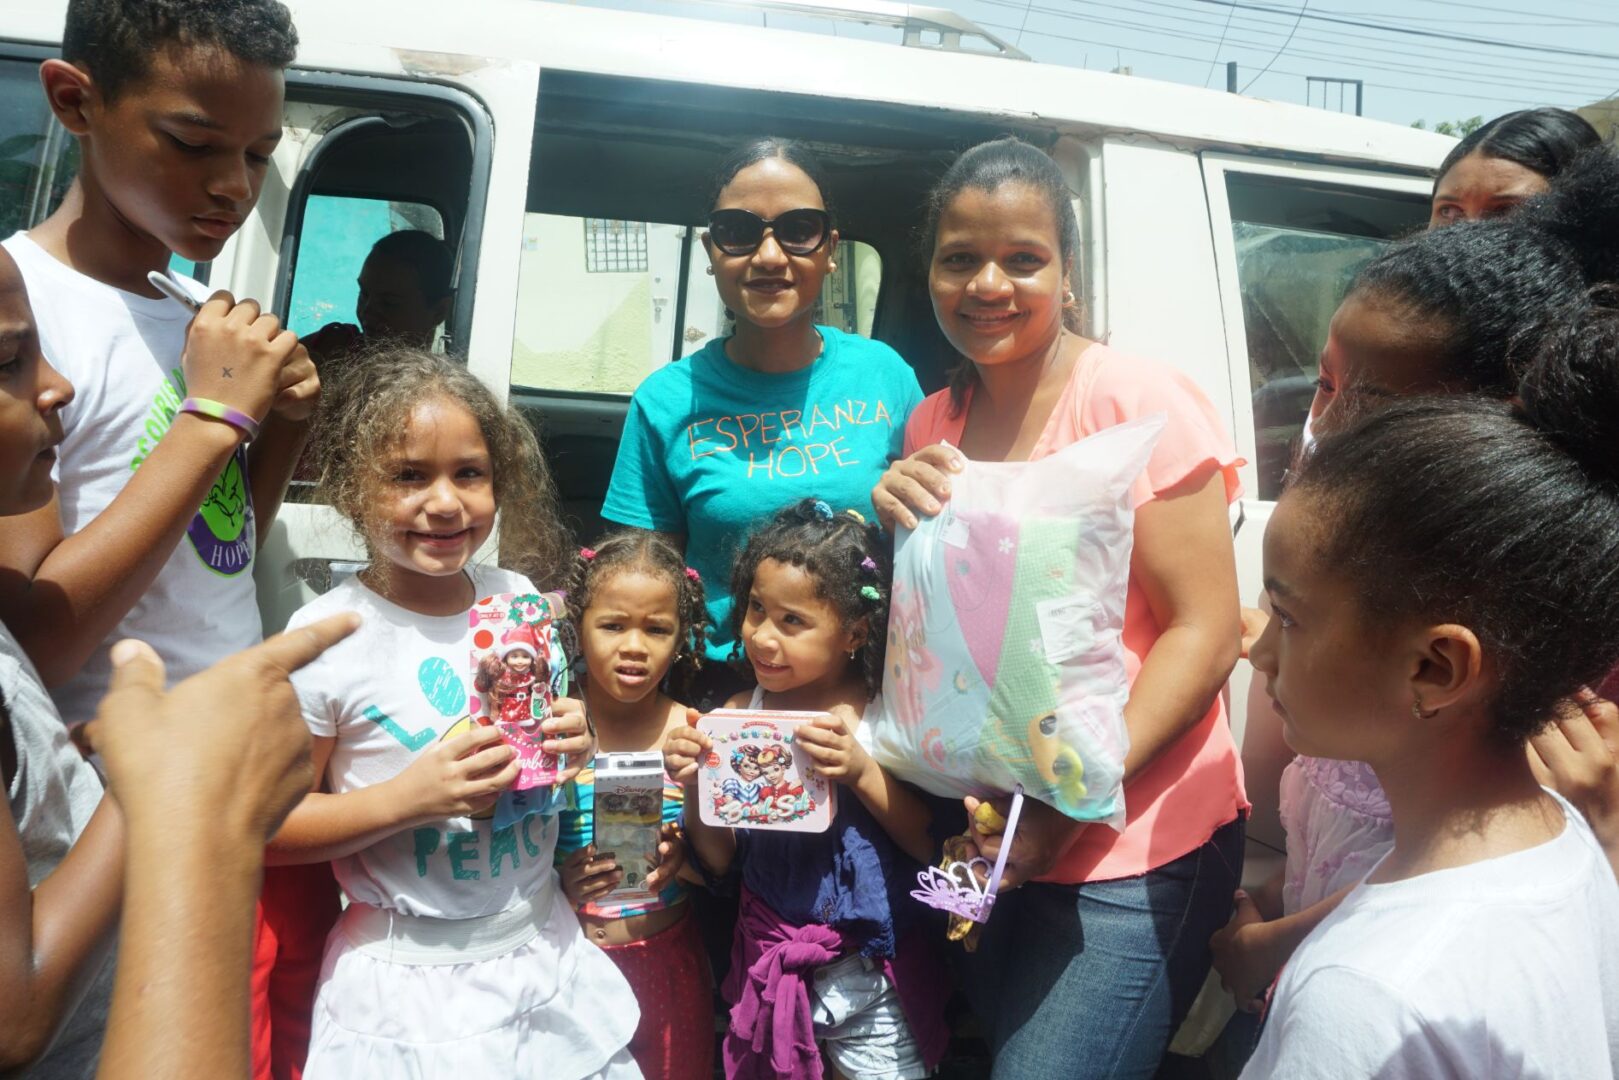 A staff in blue shirt, a woman, and a group of young girls holding toys in front of a vehicle with an opened door